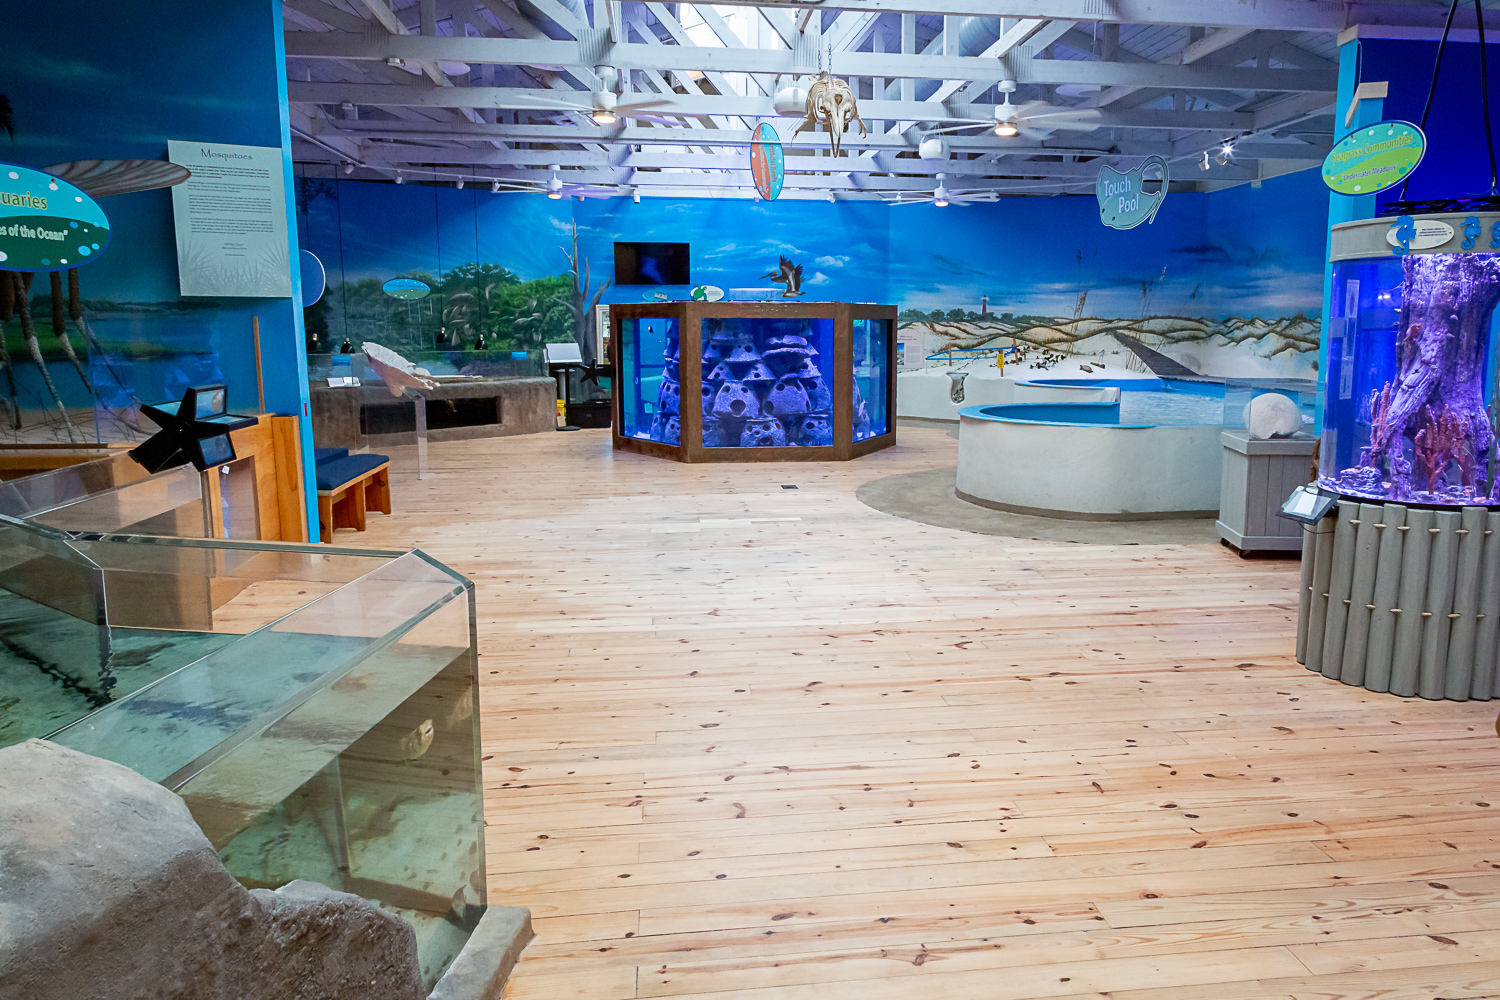 marine science center exhibits including artificial reef and touch pool